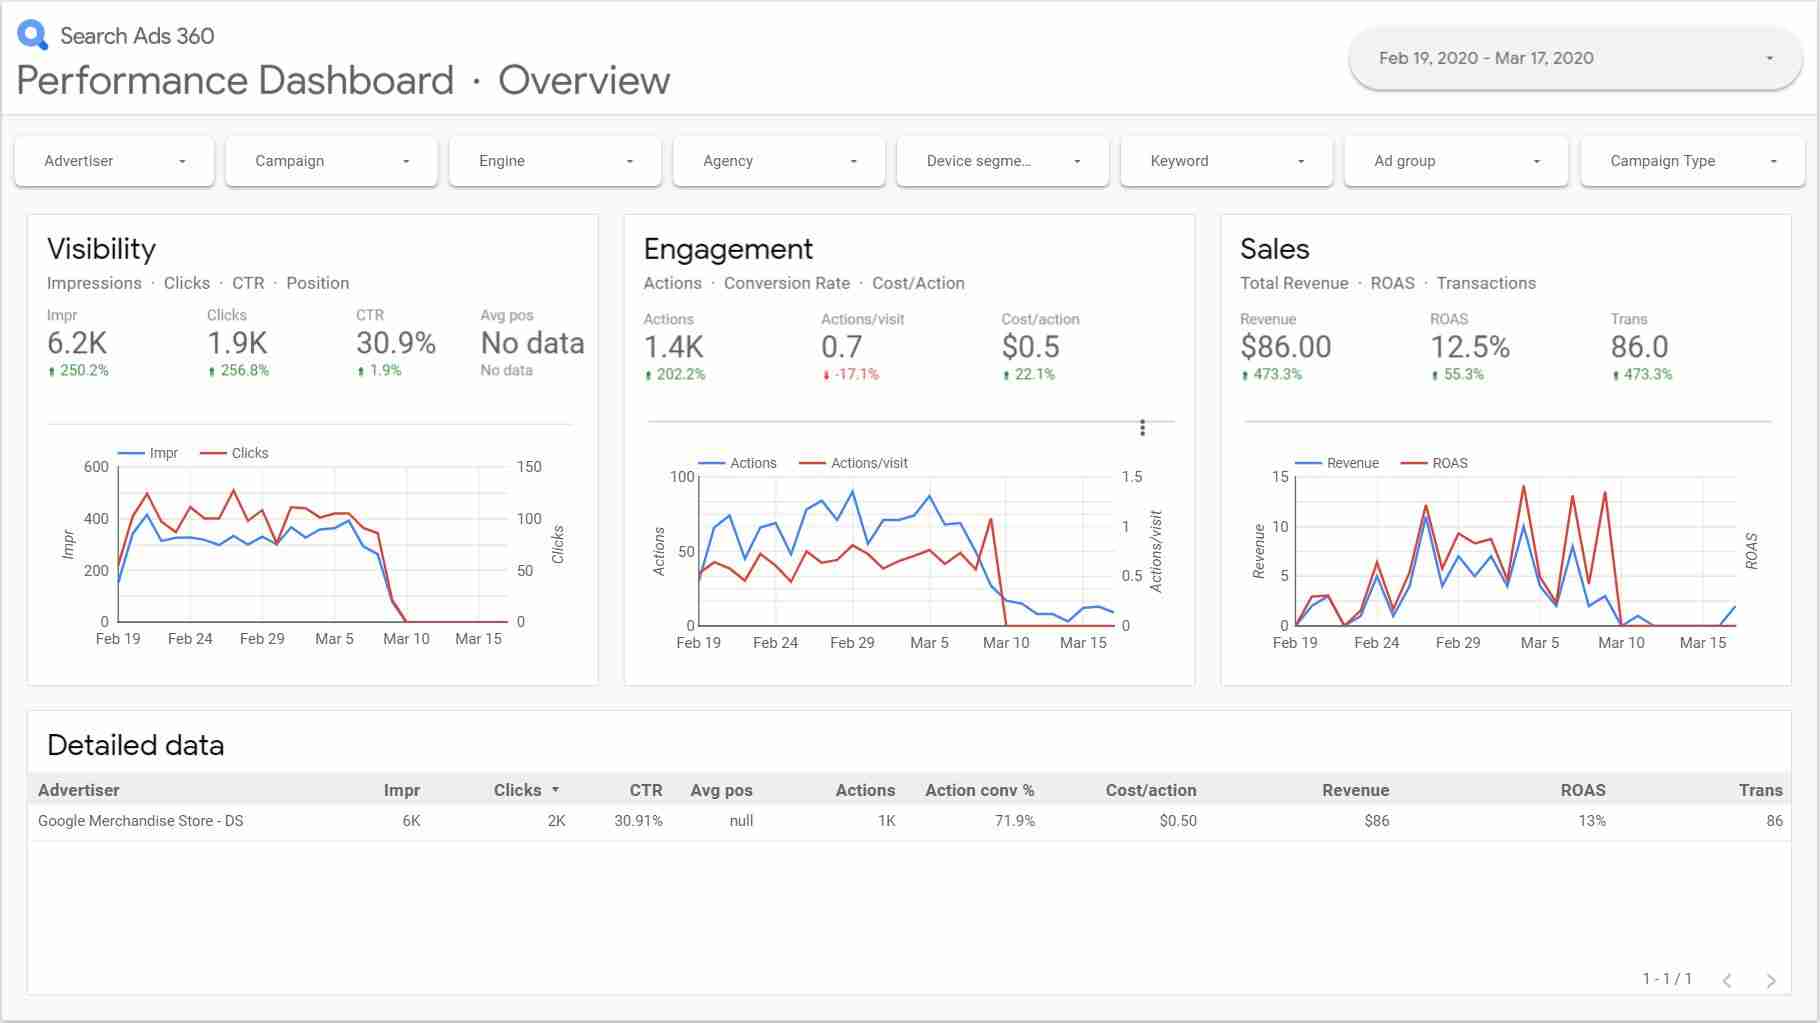 Search Ads 360 Performance Dashboard